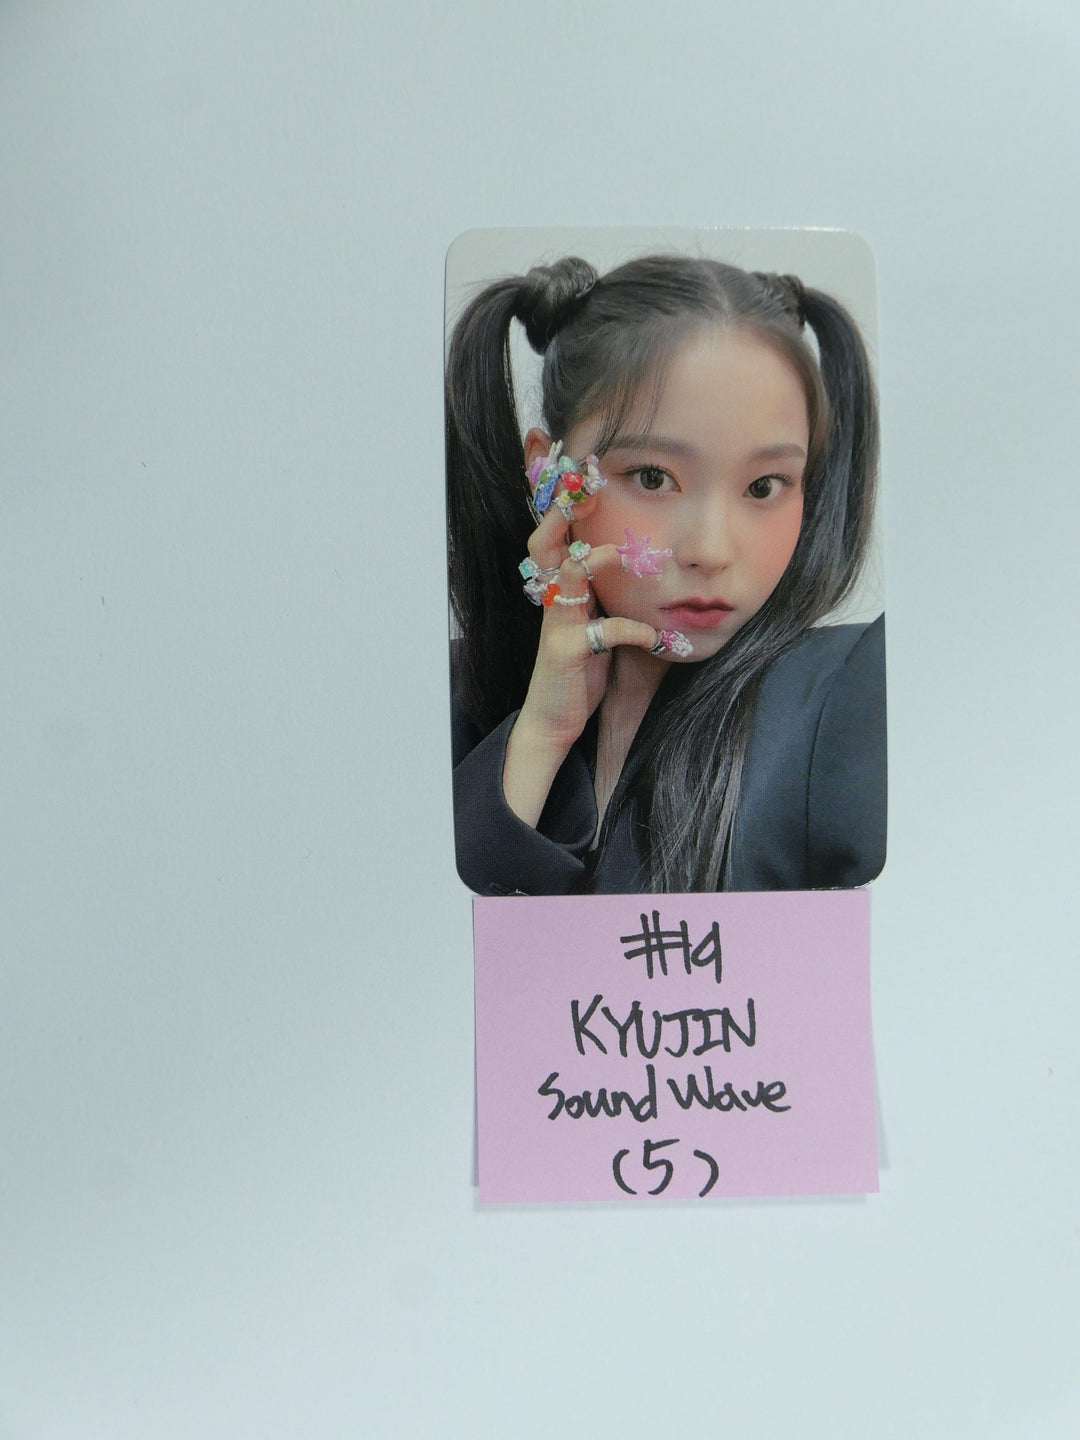 NMIXX 'AD MARE' 1st Single - Soundwave Fansign Event Photocard